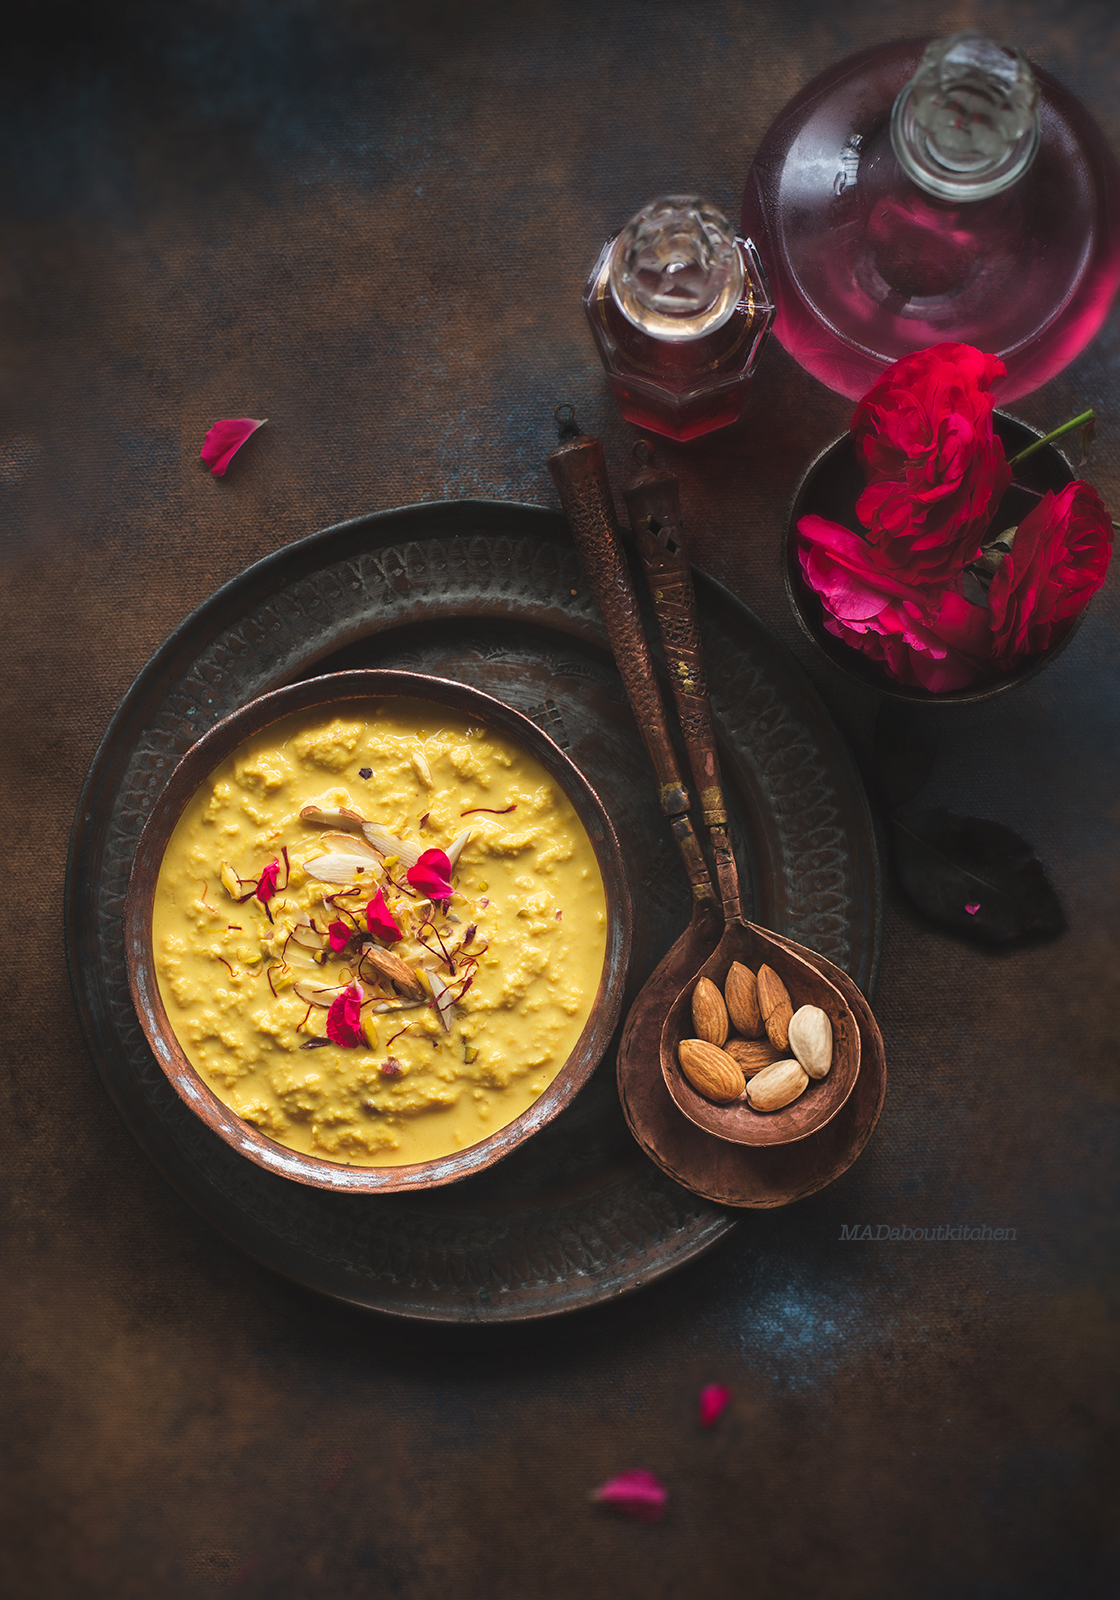 Rabdi, is an Indian dessert made by reducing whole milk to layers of cream. It is flavoured using saffron & is garnished with almonds & rose petals.